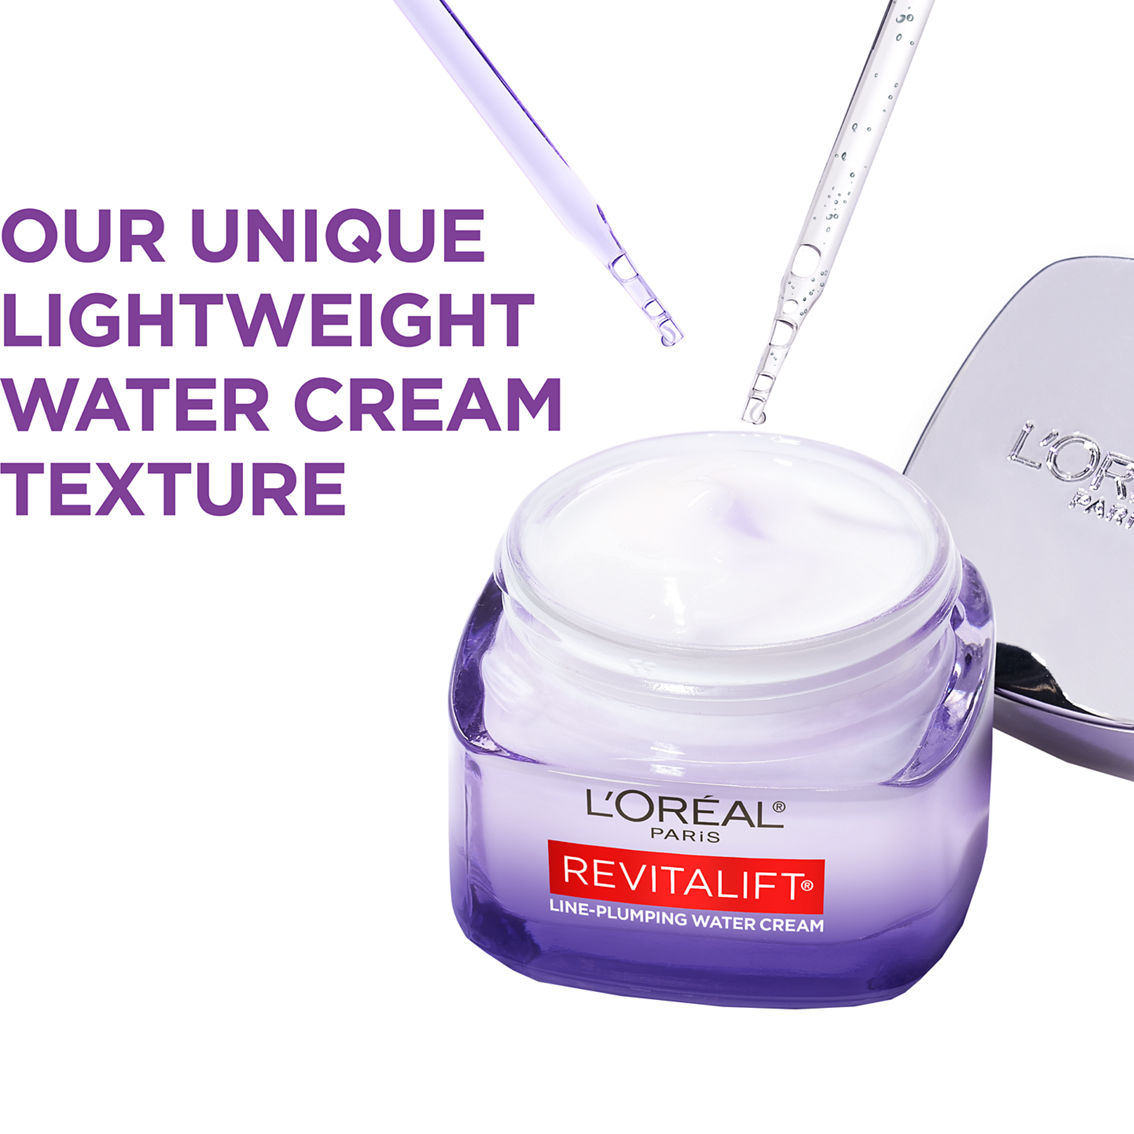 L'Oreal Micro Hyaluronic Acid + Ceramides Line-Plumping Water Cream - Image 8 of 10